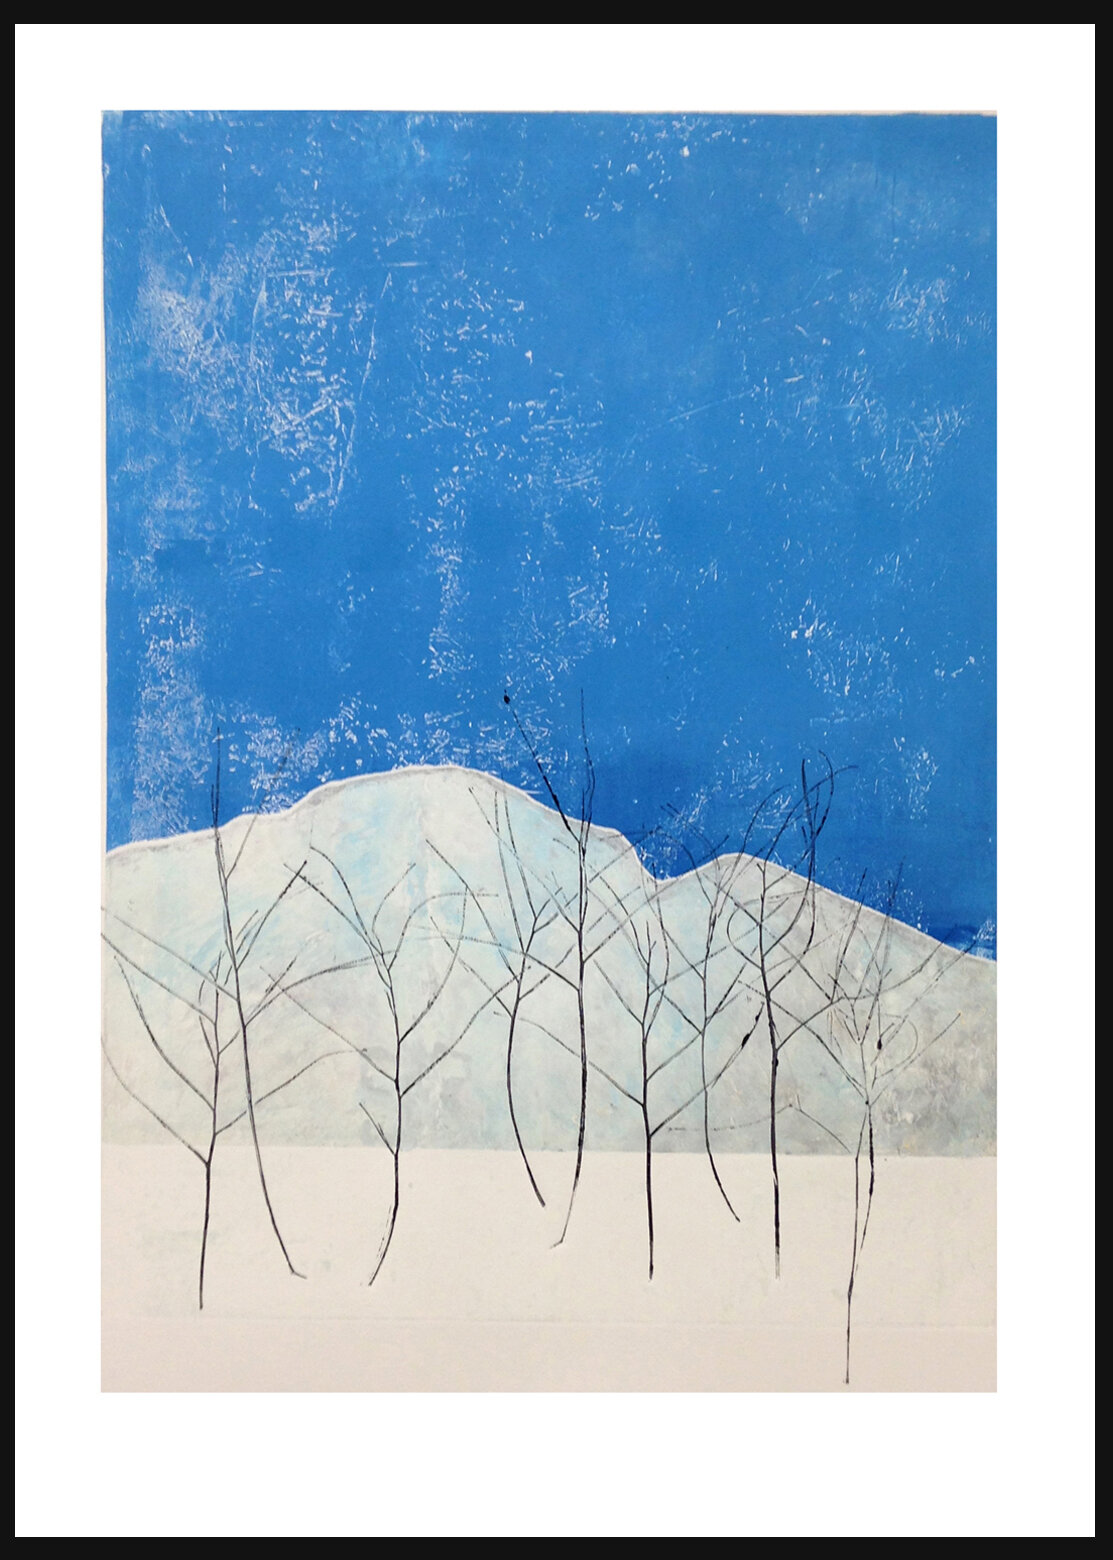  Inspired by winter days on the mountain,     Woodland in Snow   captures the crisp serene mood of the moment. It is a monoprint measuring 22 x 30 inches. It is a unique print, 1/1.   $160  